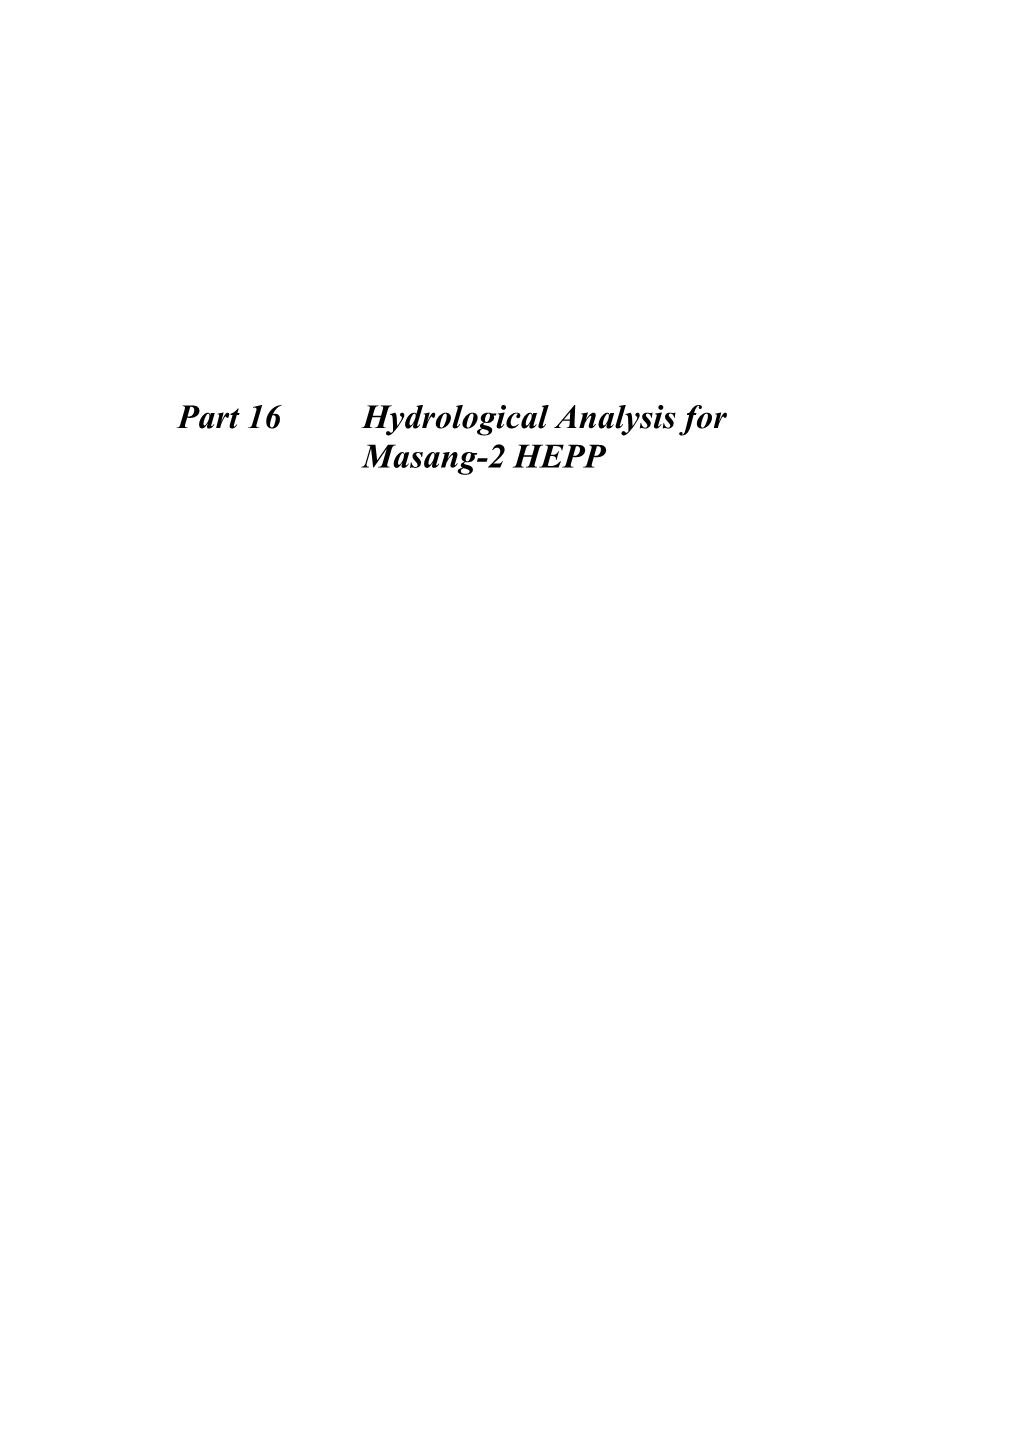 Part 16 Hydrological Analysis for Masang-2 HEPP Final Report (Supporting Pre F/S) Part 16 Hydrological Analysis for Masang-2 HEPP